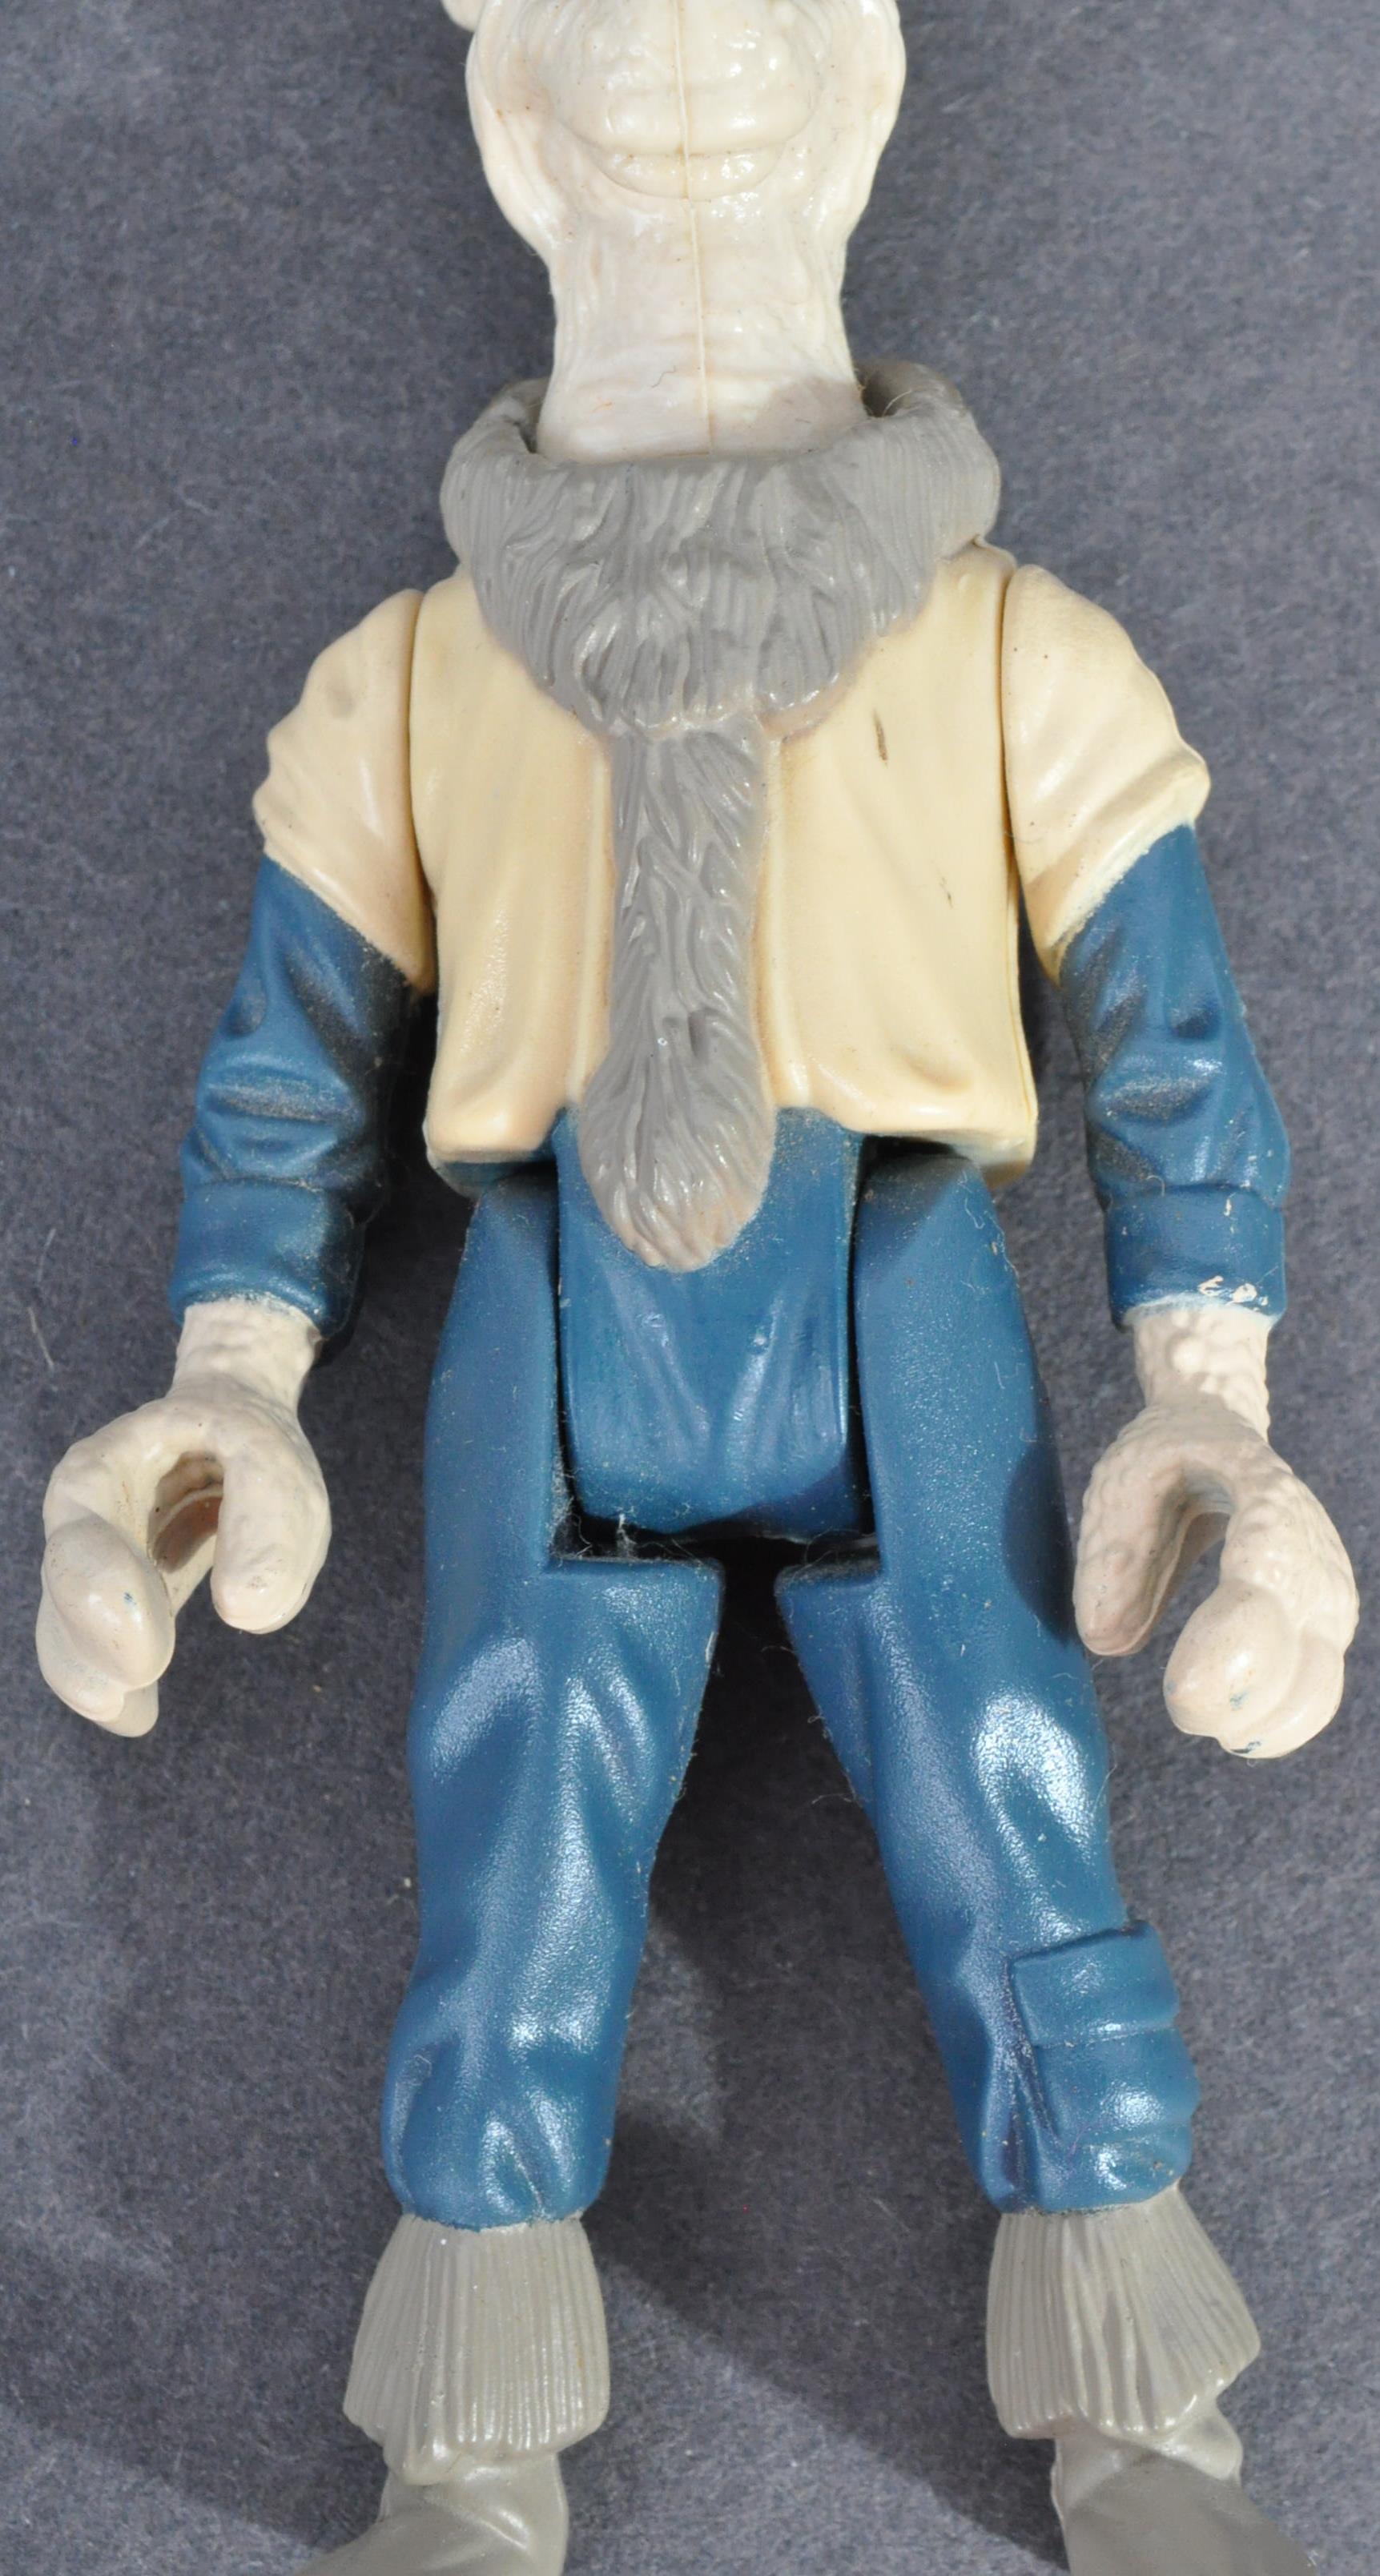 STAR WARS - LAST 17 - RARE YAK FACE ACTION FIGURE - Image 3 of 6